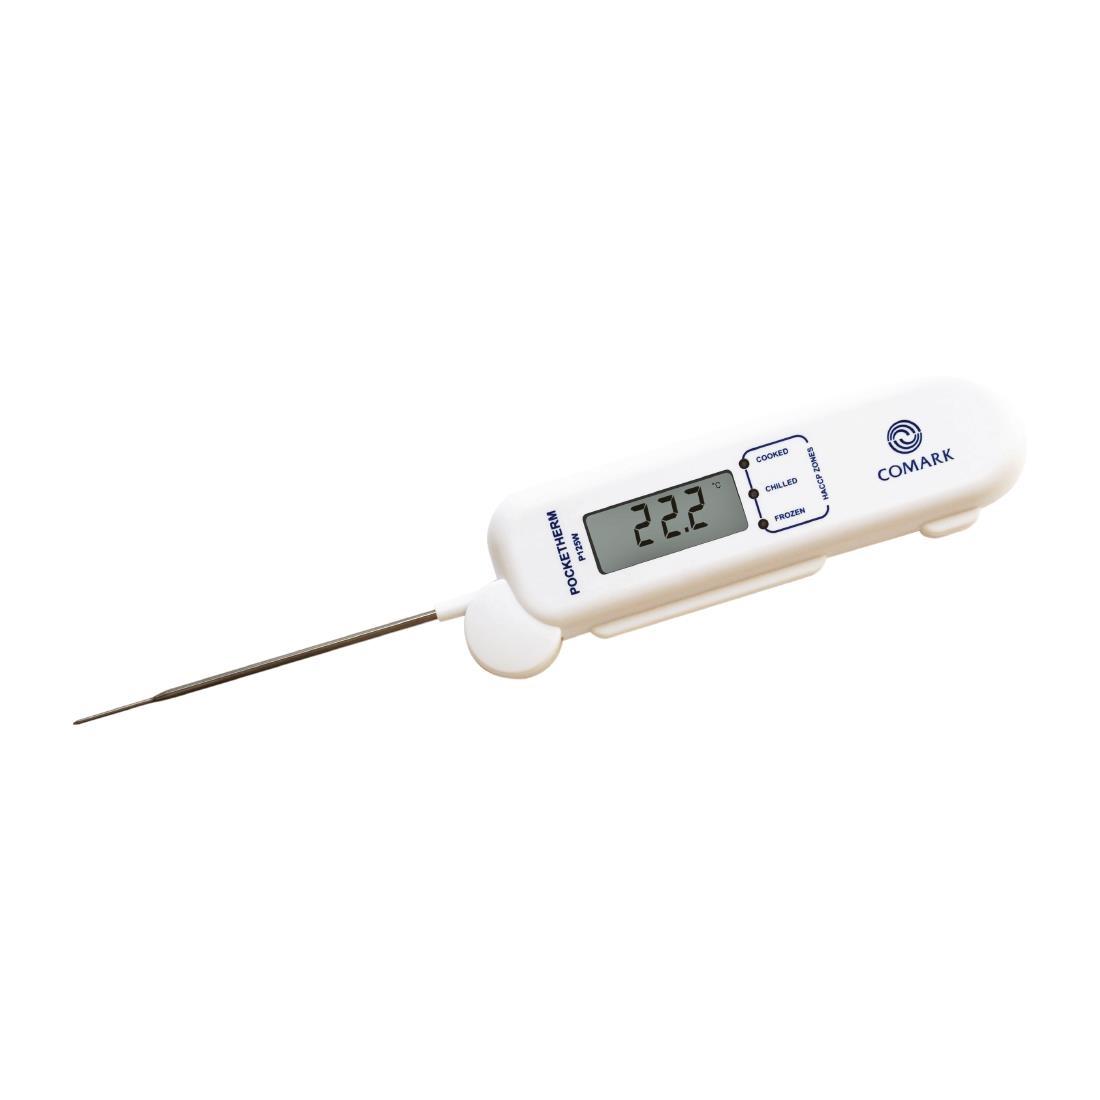 Folding thermometer -30 to 170°C